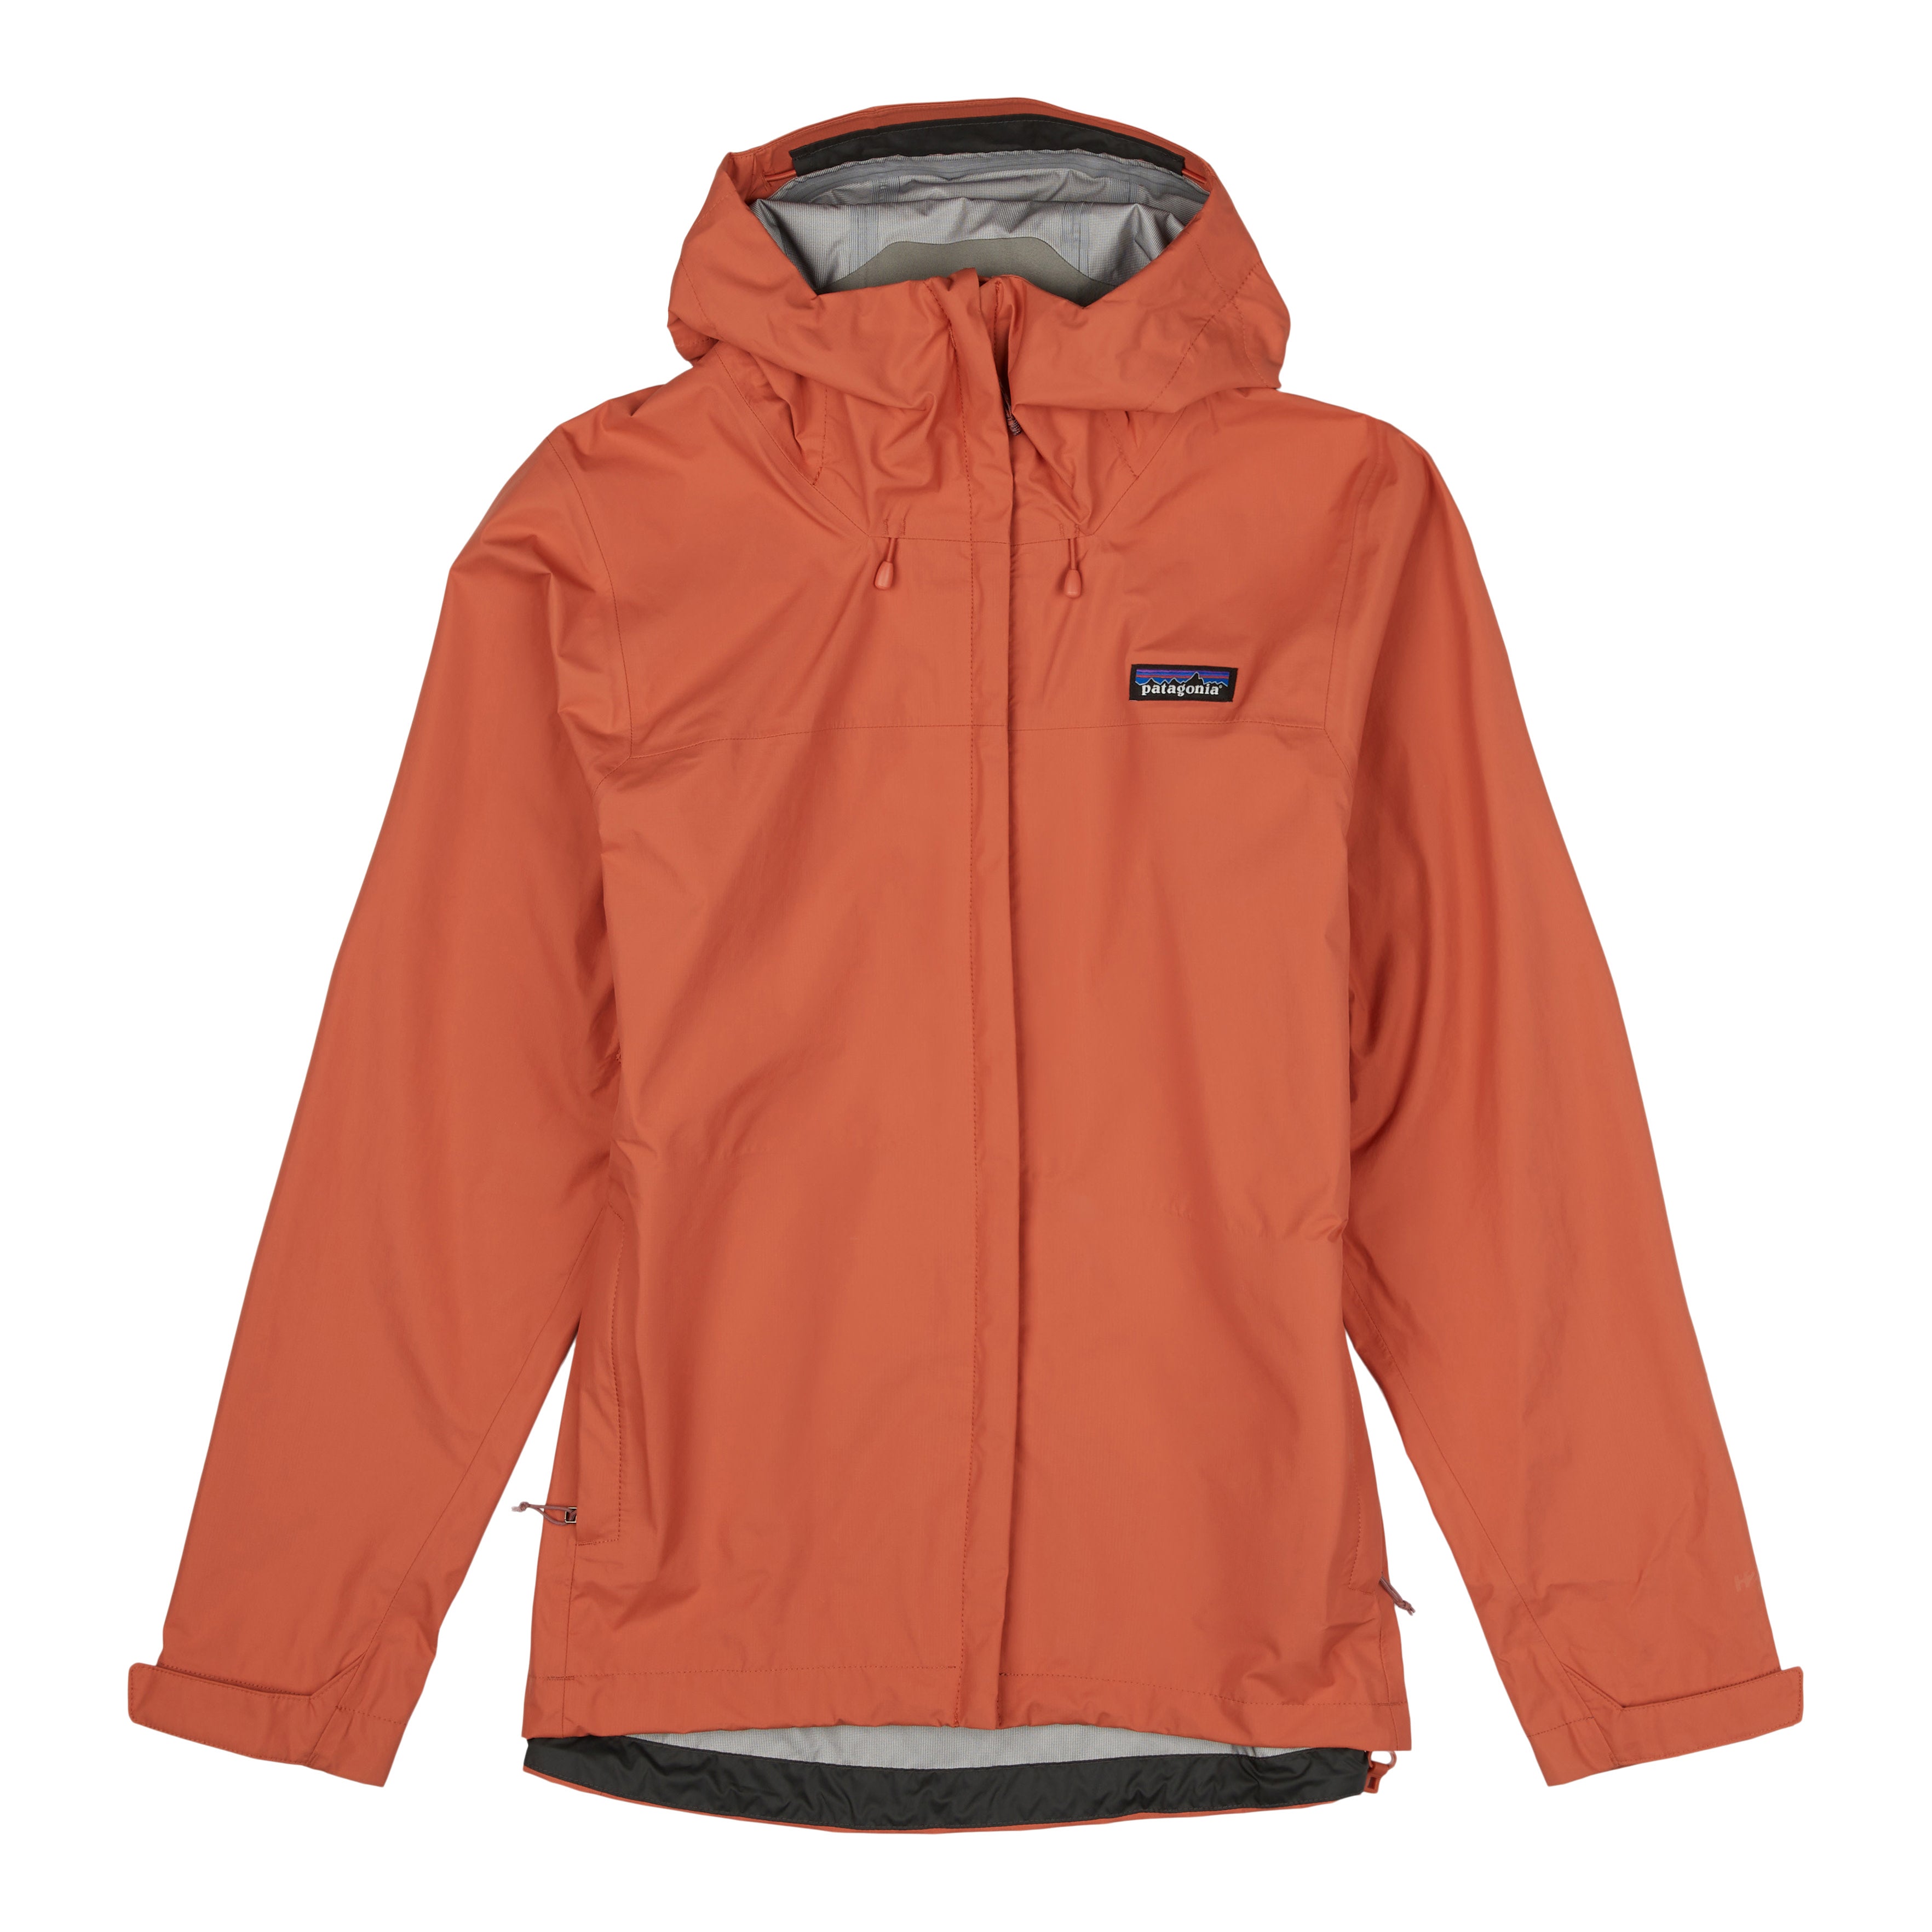 Patagonia Women's Torrent Shell 3L Jacket, Alpine Country Lodge